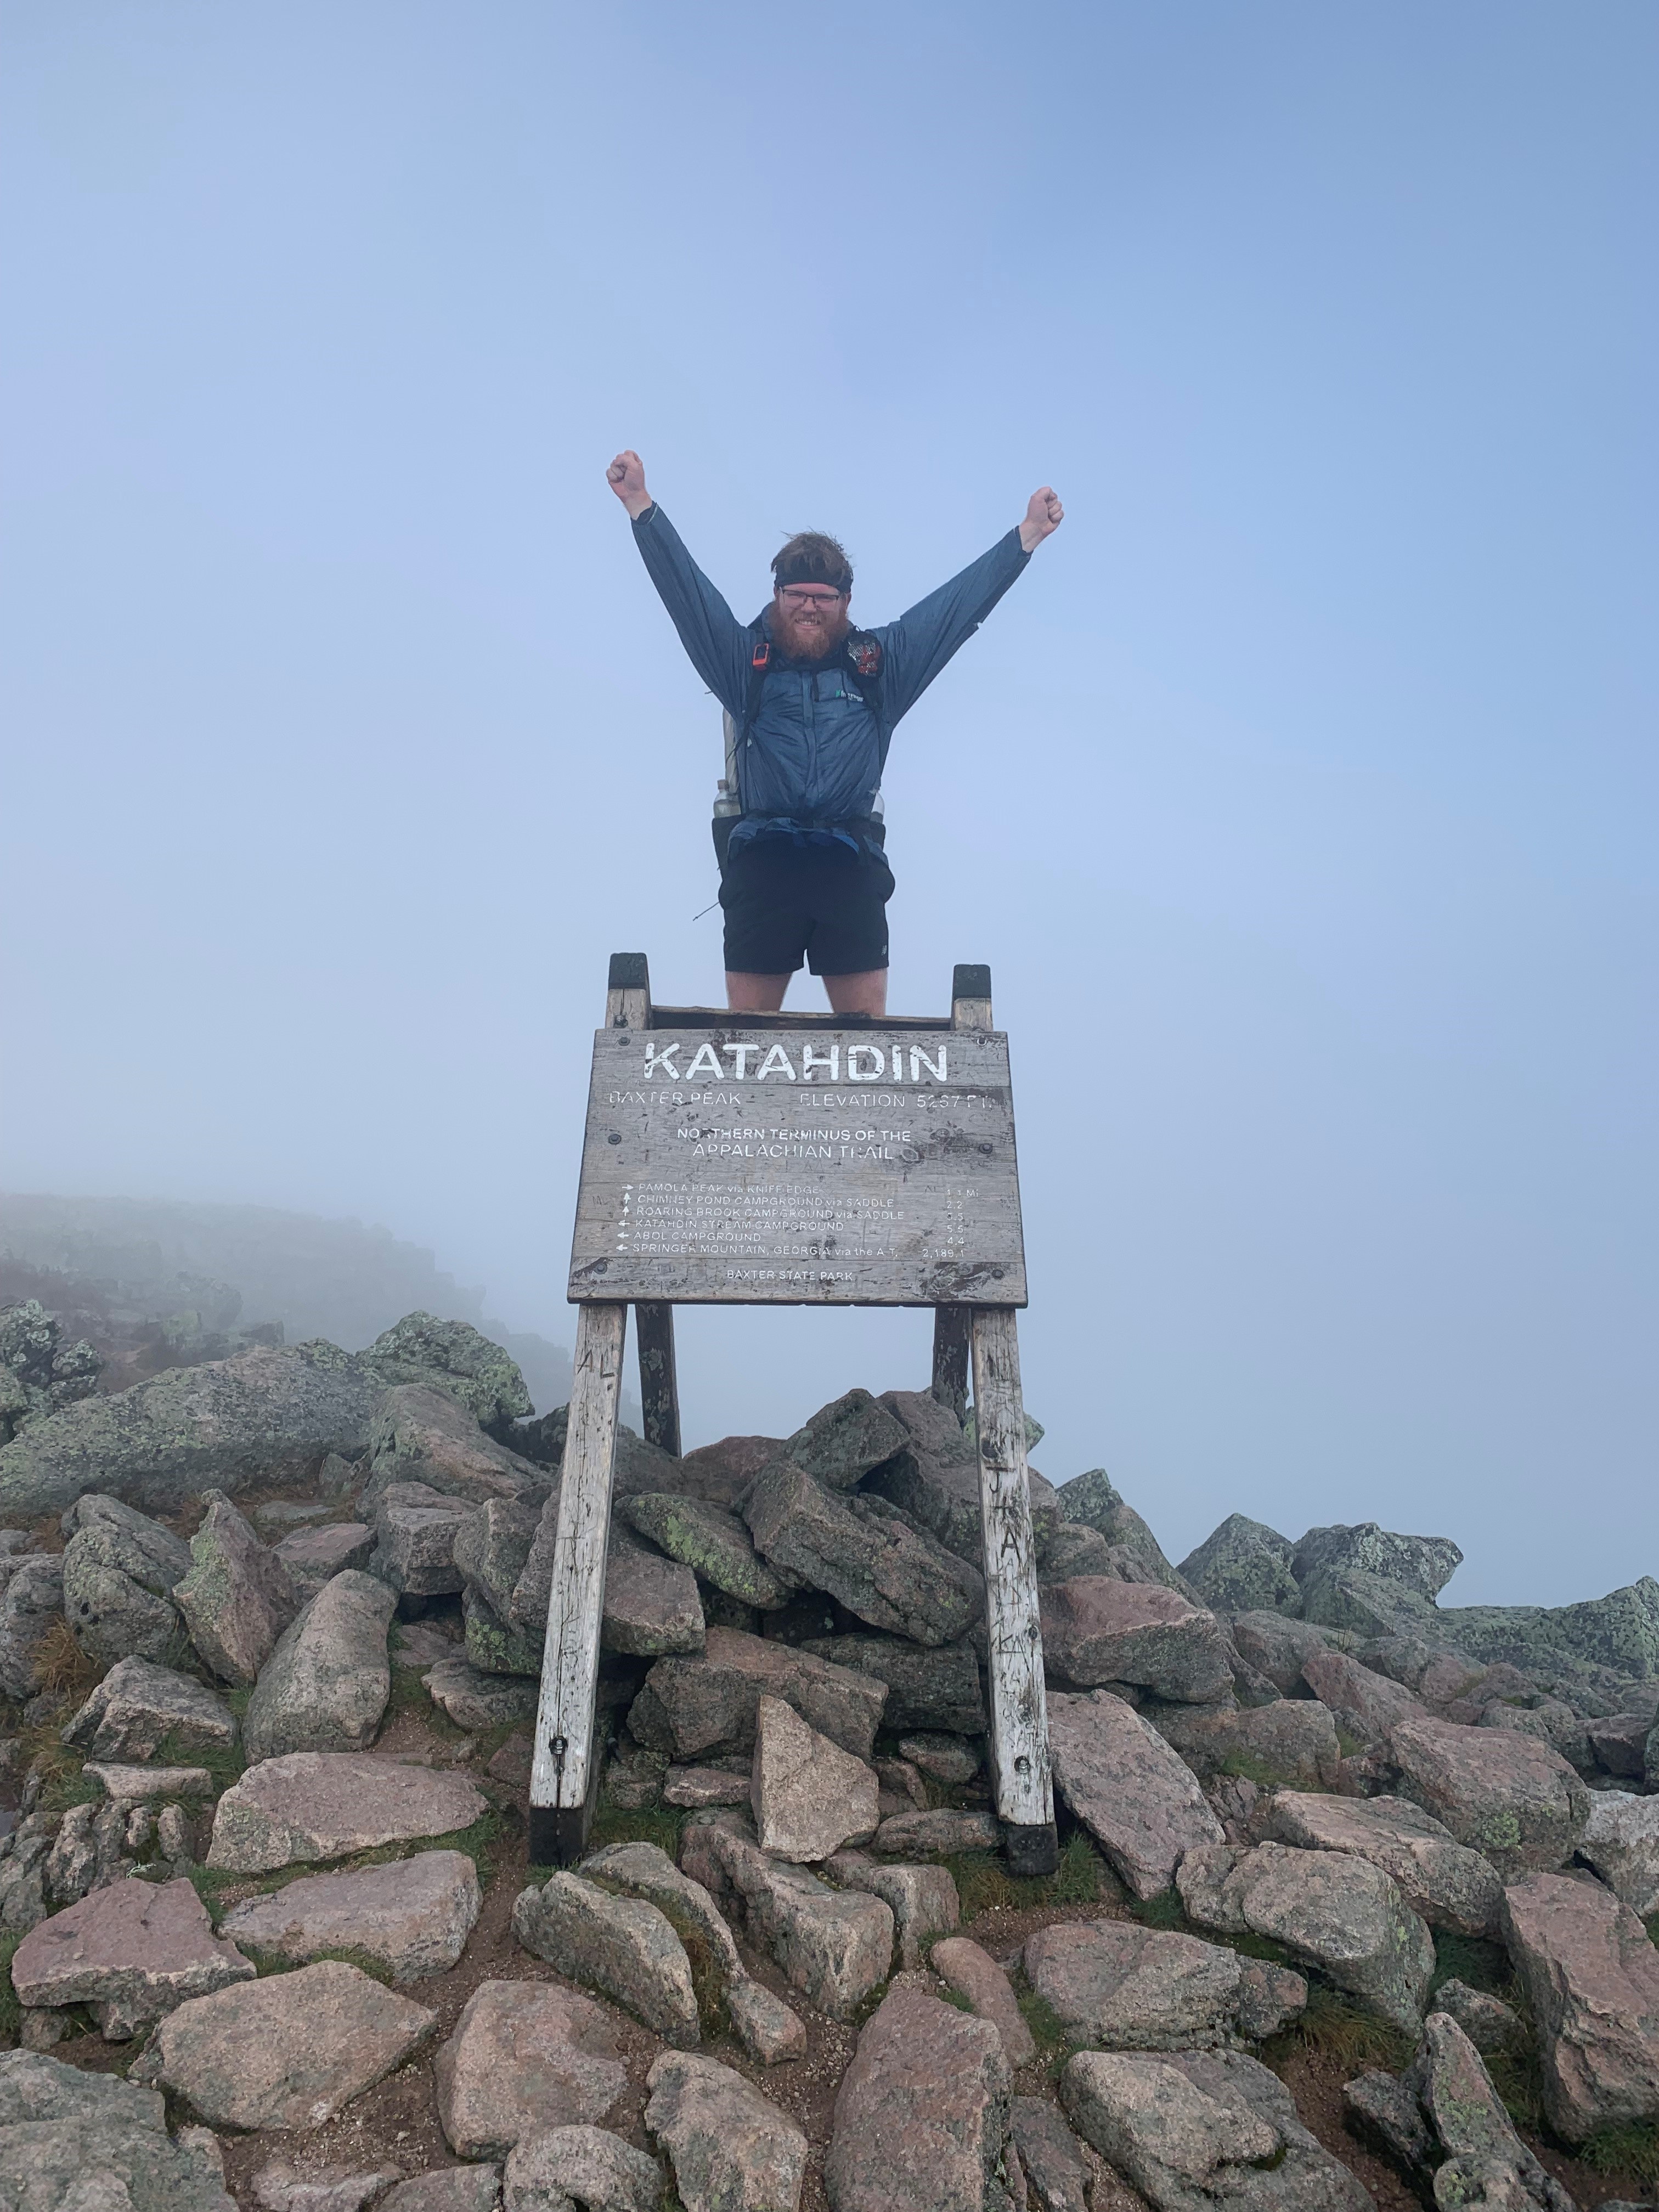 Clay Comer with arms raised, showing excitement in completing the Appalachian Trail